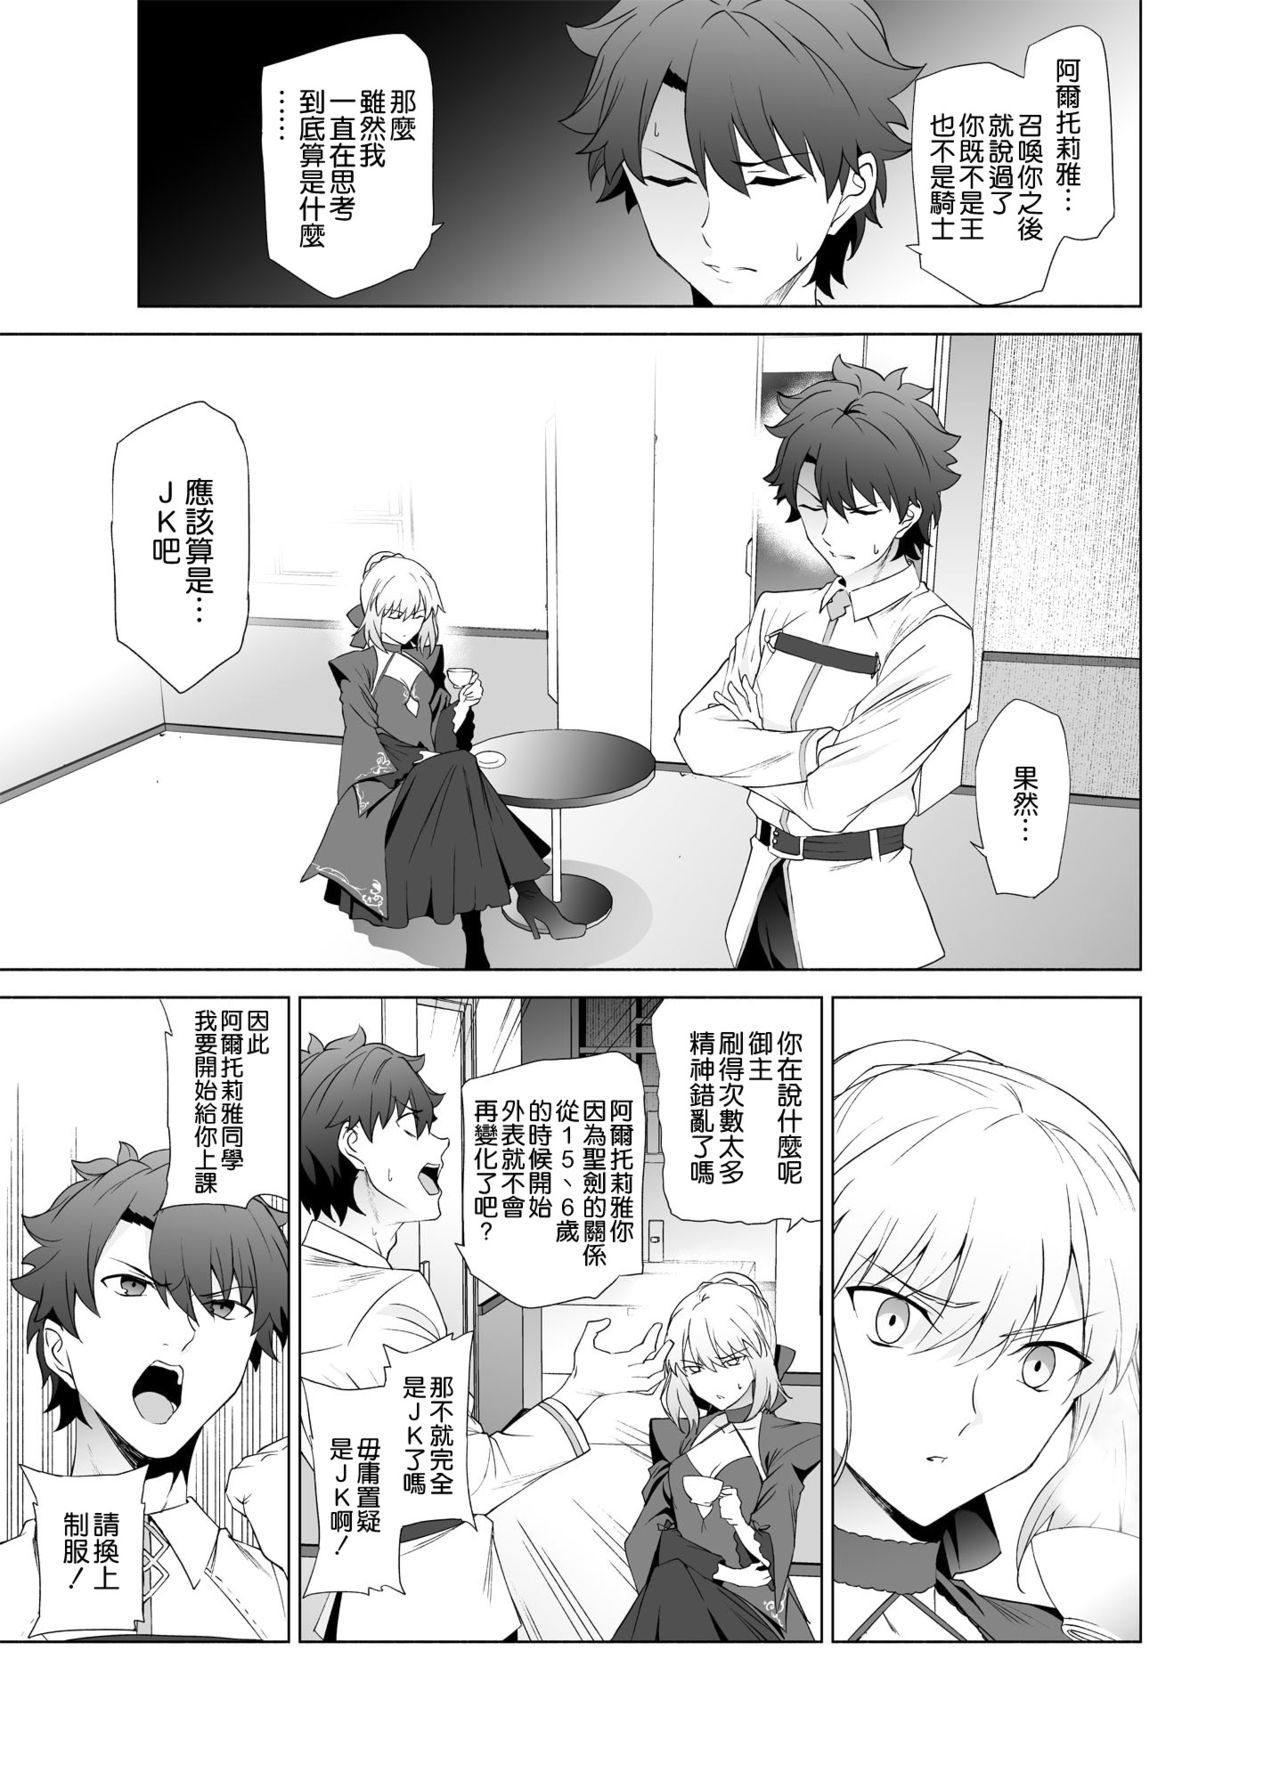 [EXTENDED PART (Endo Yoshiki)] JK Arturia [Alter] (Fate/Grand Order) [Chinese] [空気系☆漢化] [Digital] page 3 full